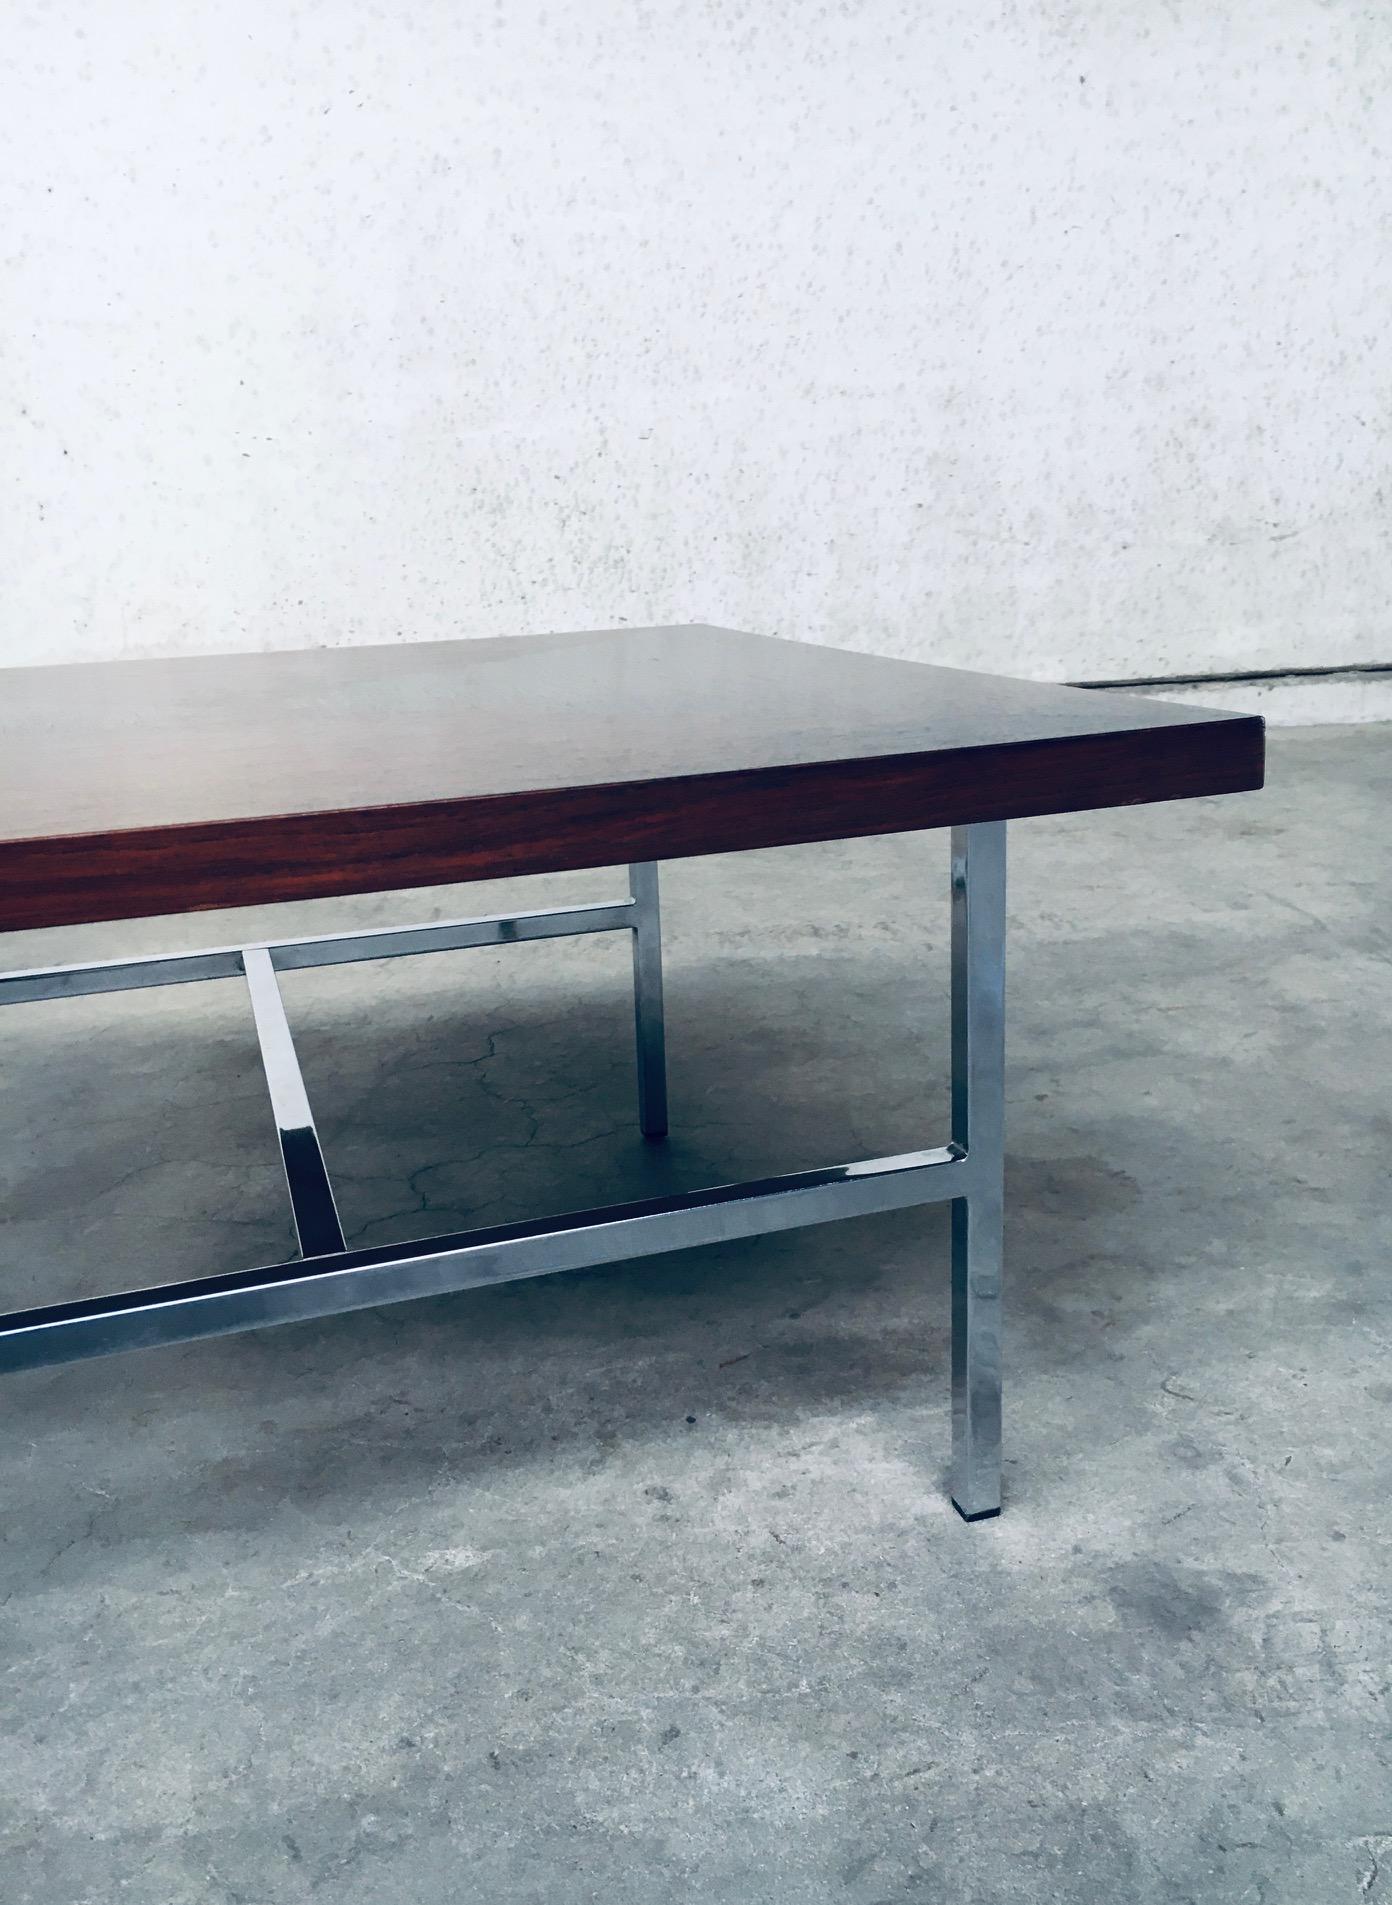 Midcentury Dutch Design Coffee Table, Netherlands 1960's For Sale 9